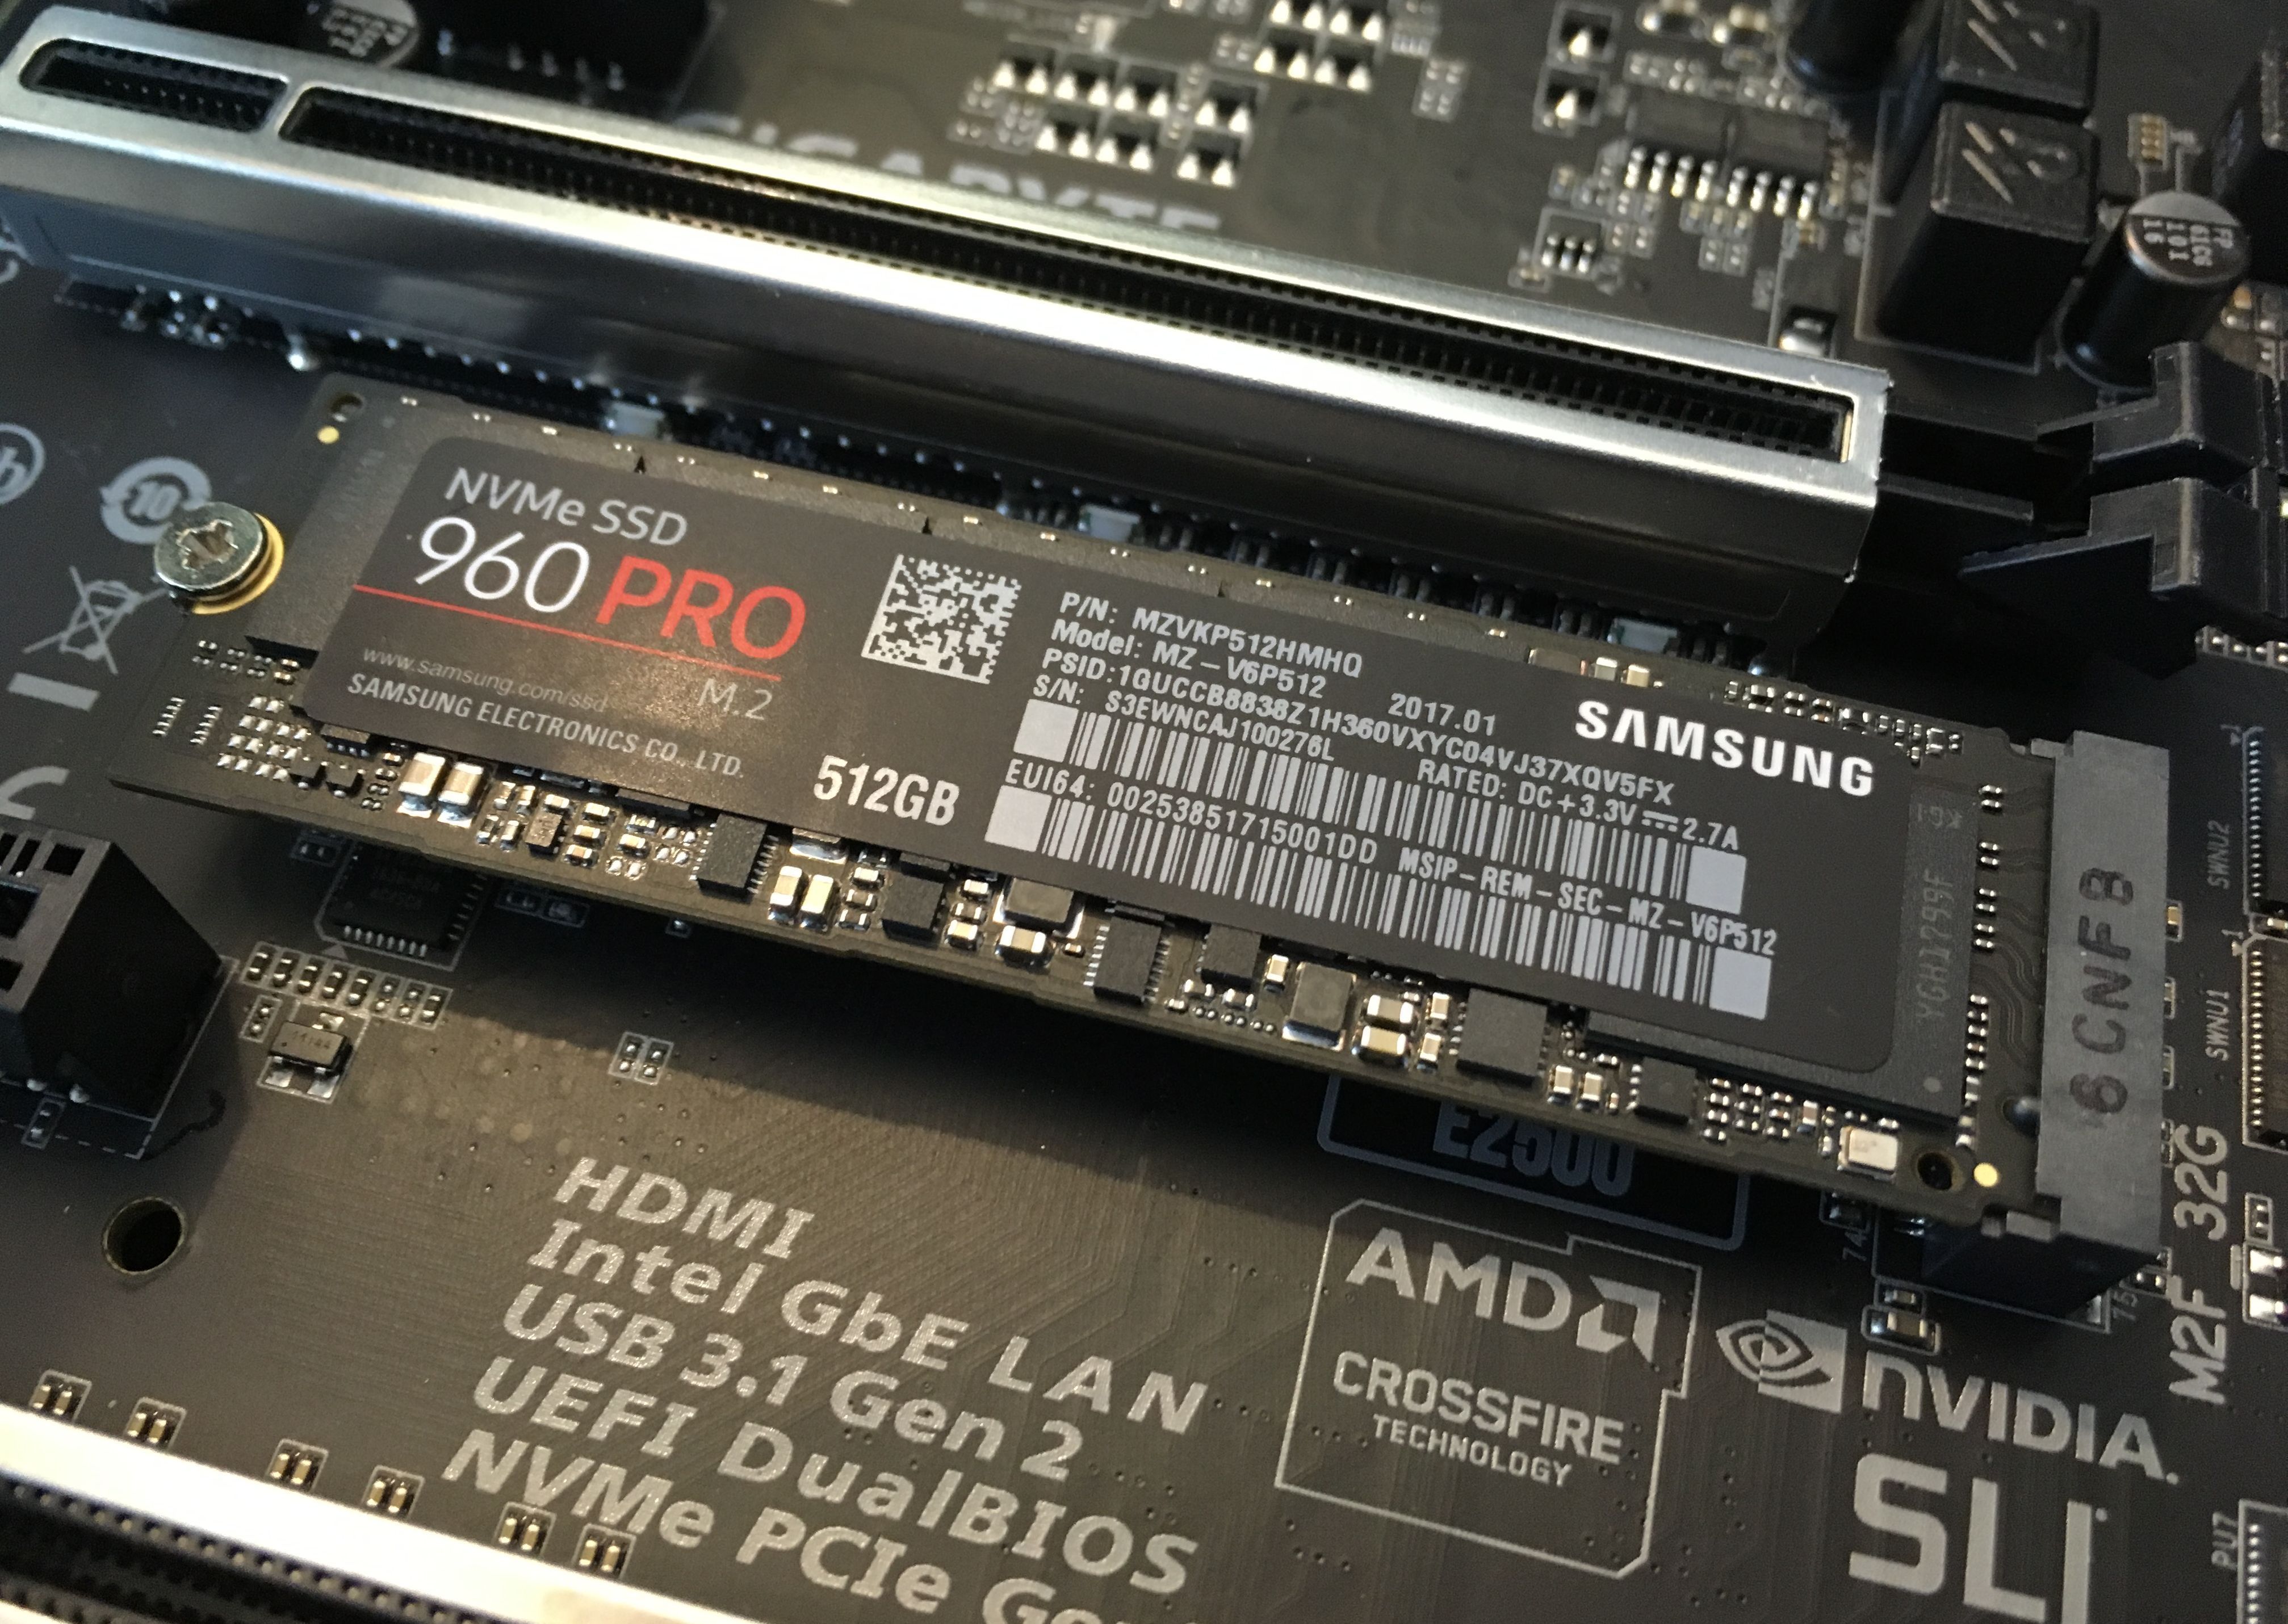 Does A Crucial P1 M 2 Nvme Fit On Z170a Pc Mate Buildapc